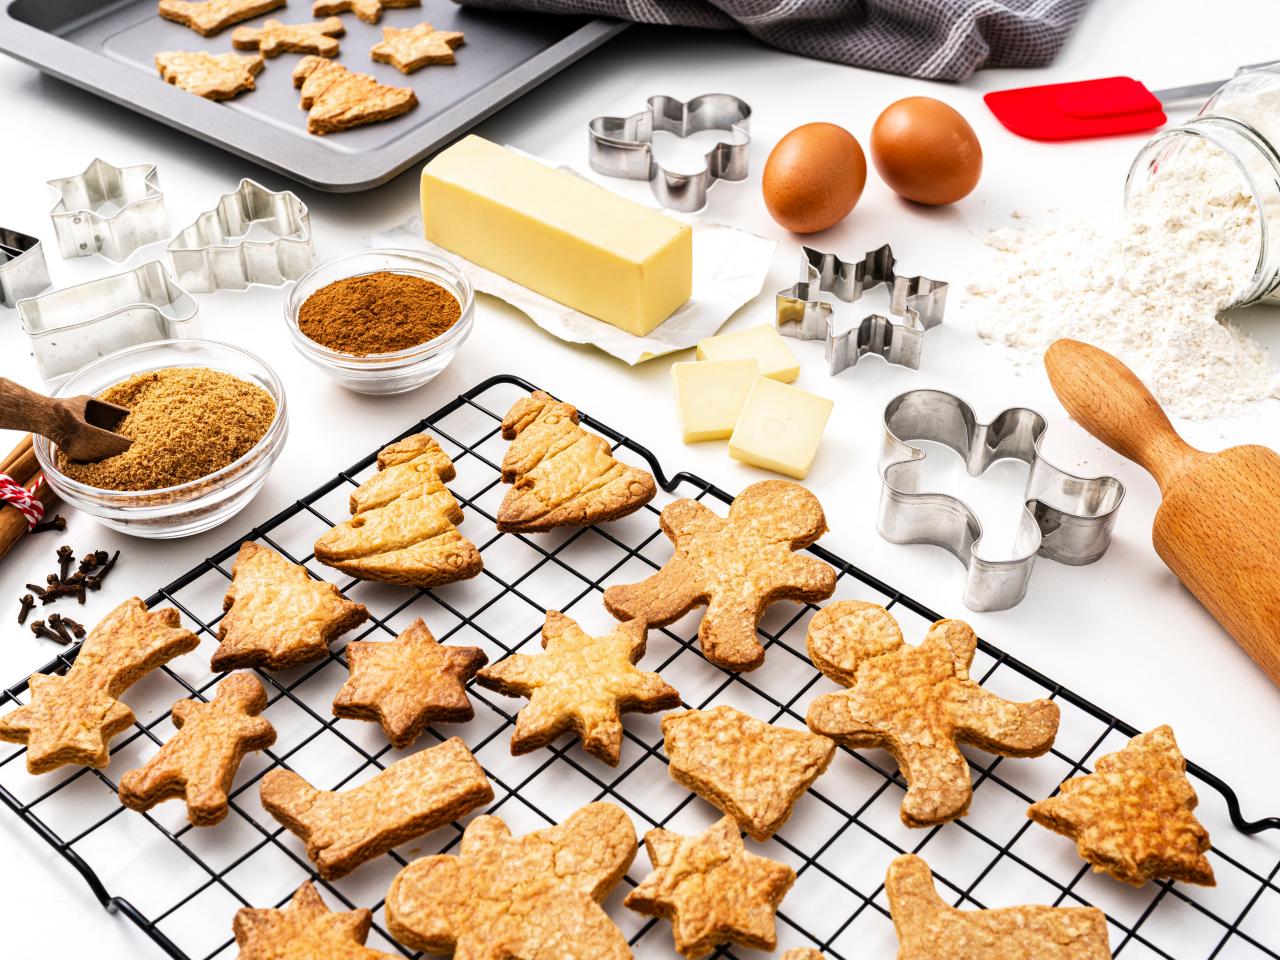 https://food.fnr.sndimg.com/content/dam/images/food/fullset/2021/11/18/Ginger-cookie-cooling-rack-rolling-pin-cutters-butter-spices-cookie-sheet.jpg.rend.hgtvcom.1280.960.suffix/1637263585764.jpeg